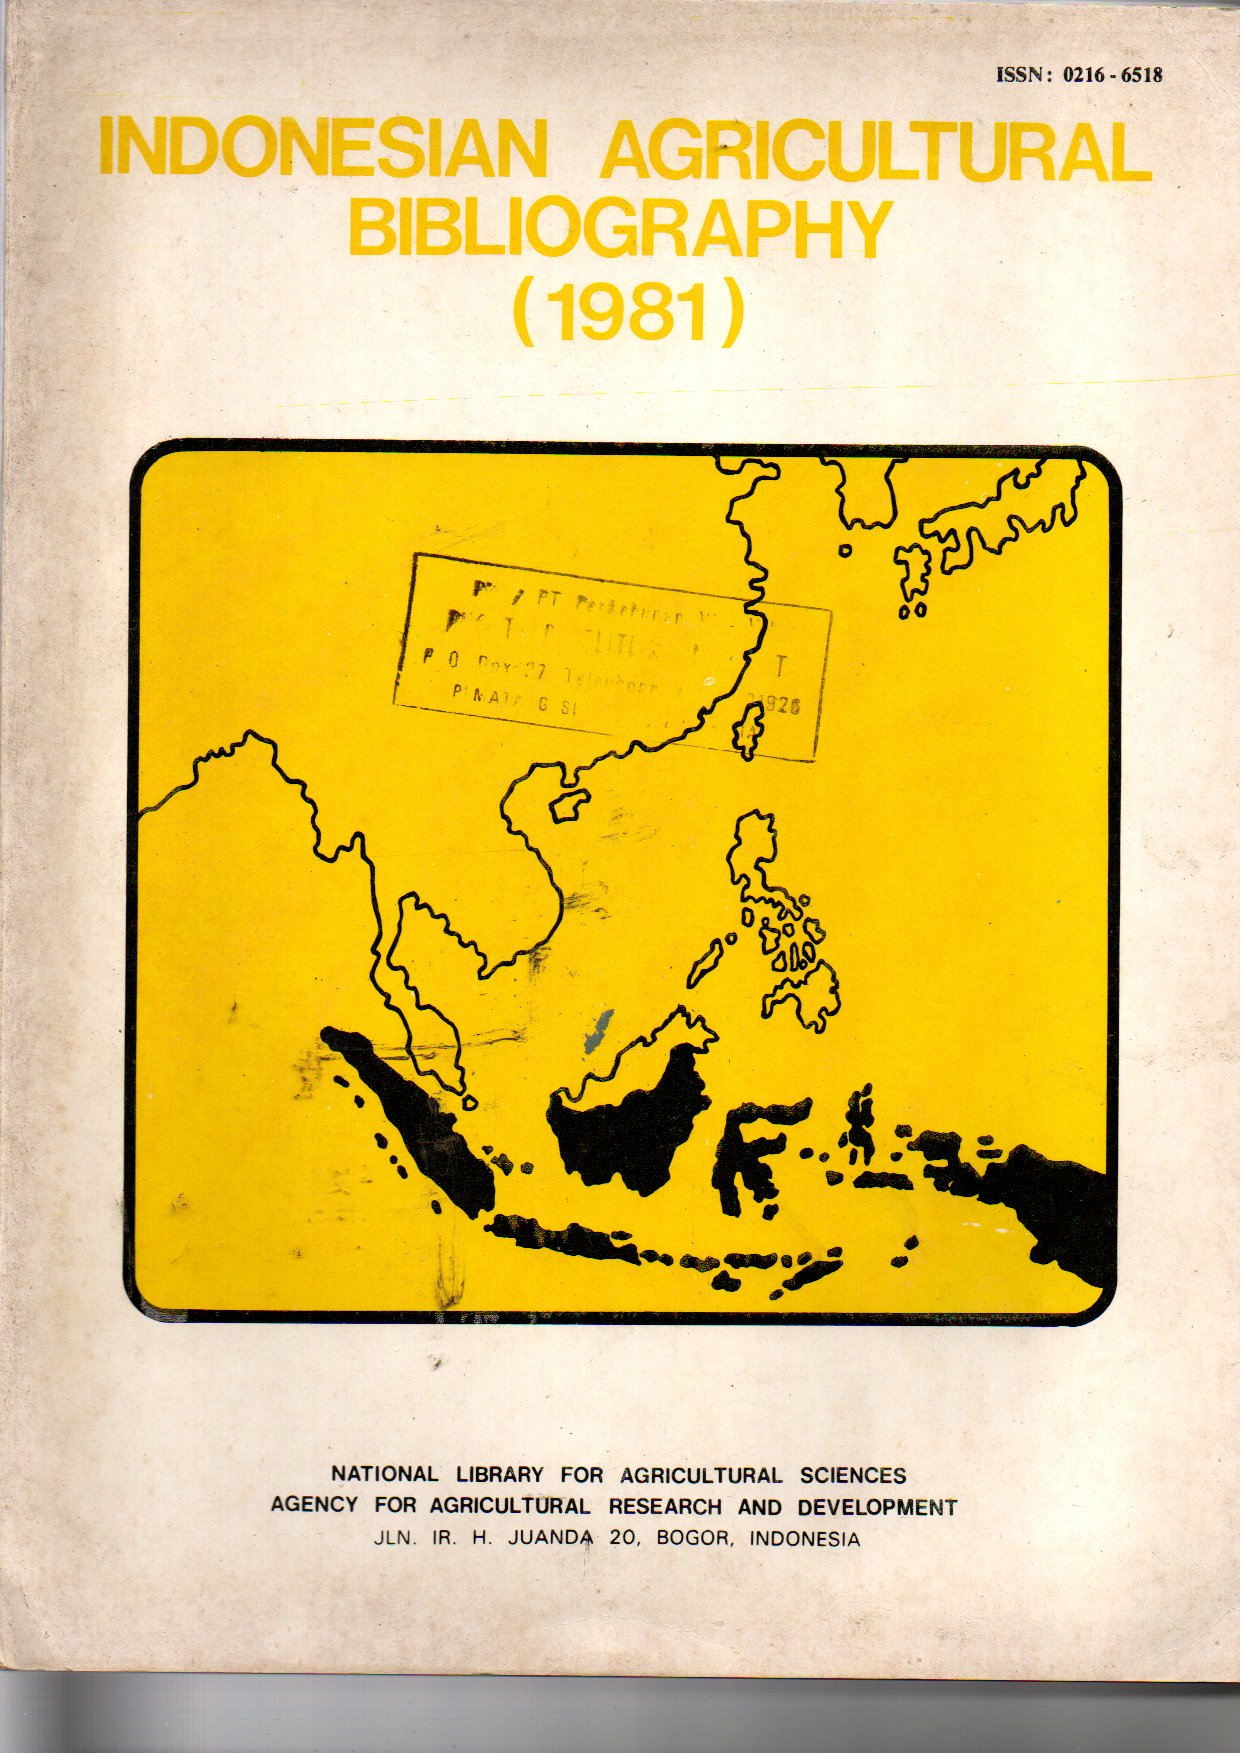 INDONESIAN AGRICULTURAL BIBLIOGRAPHY (1981)